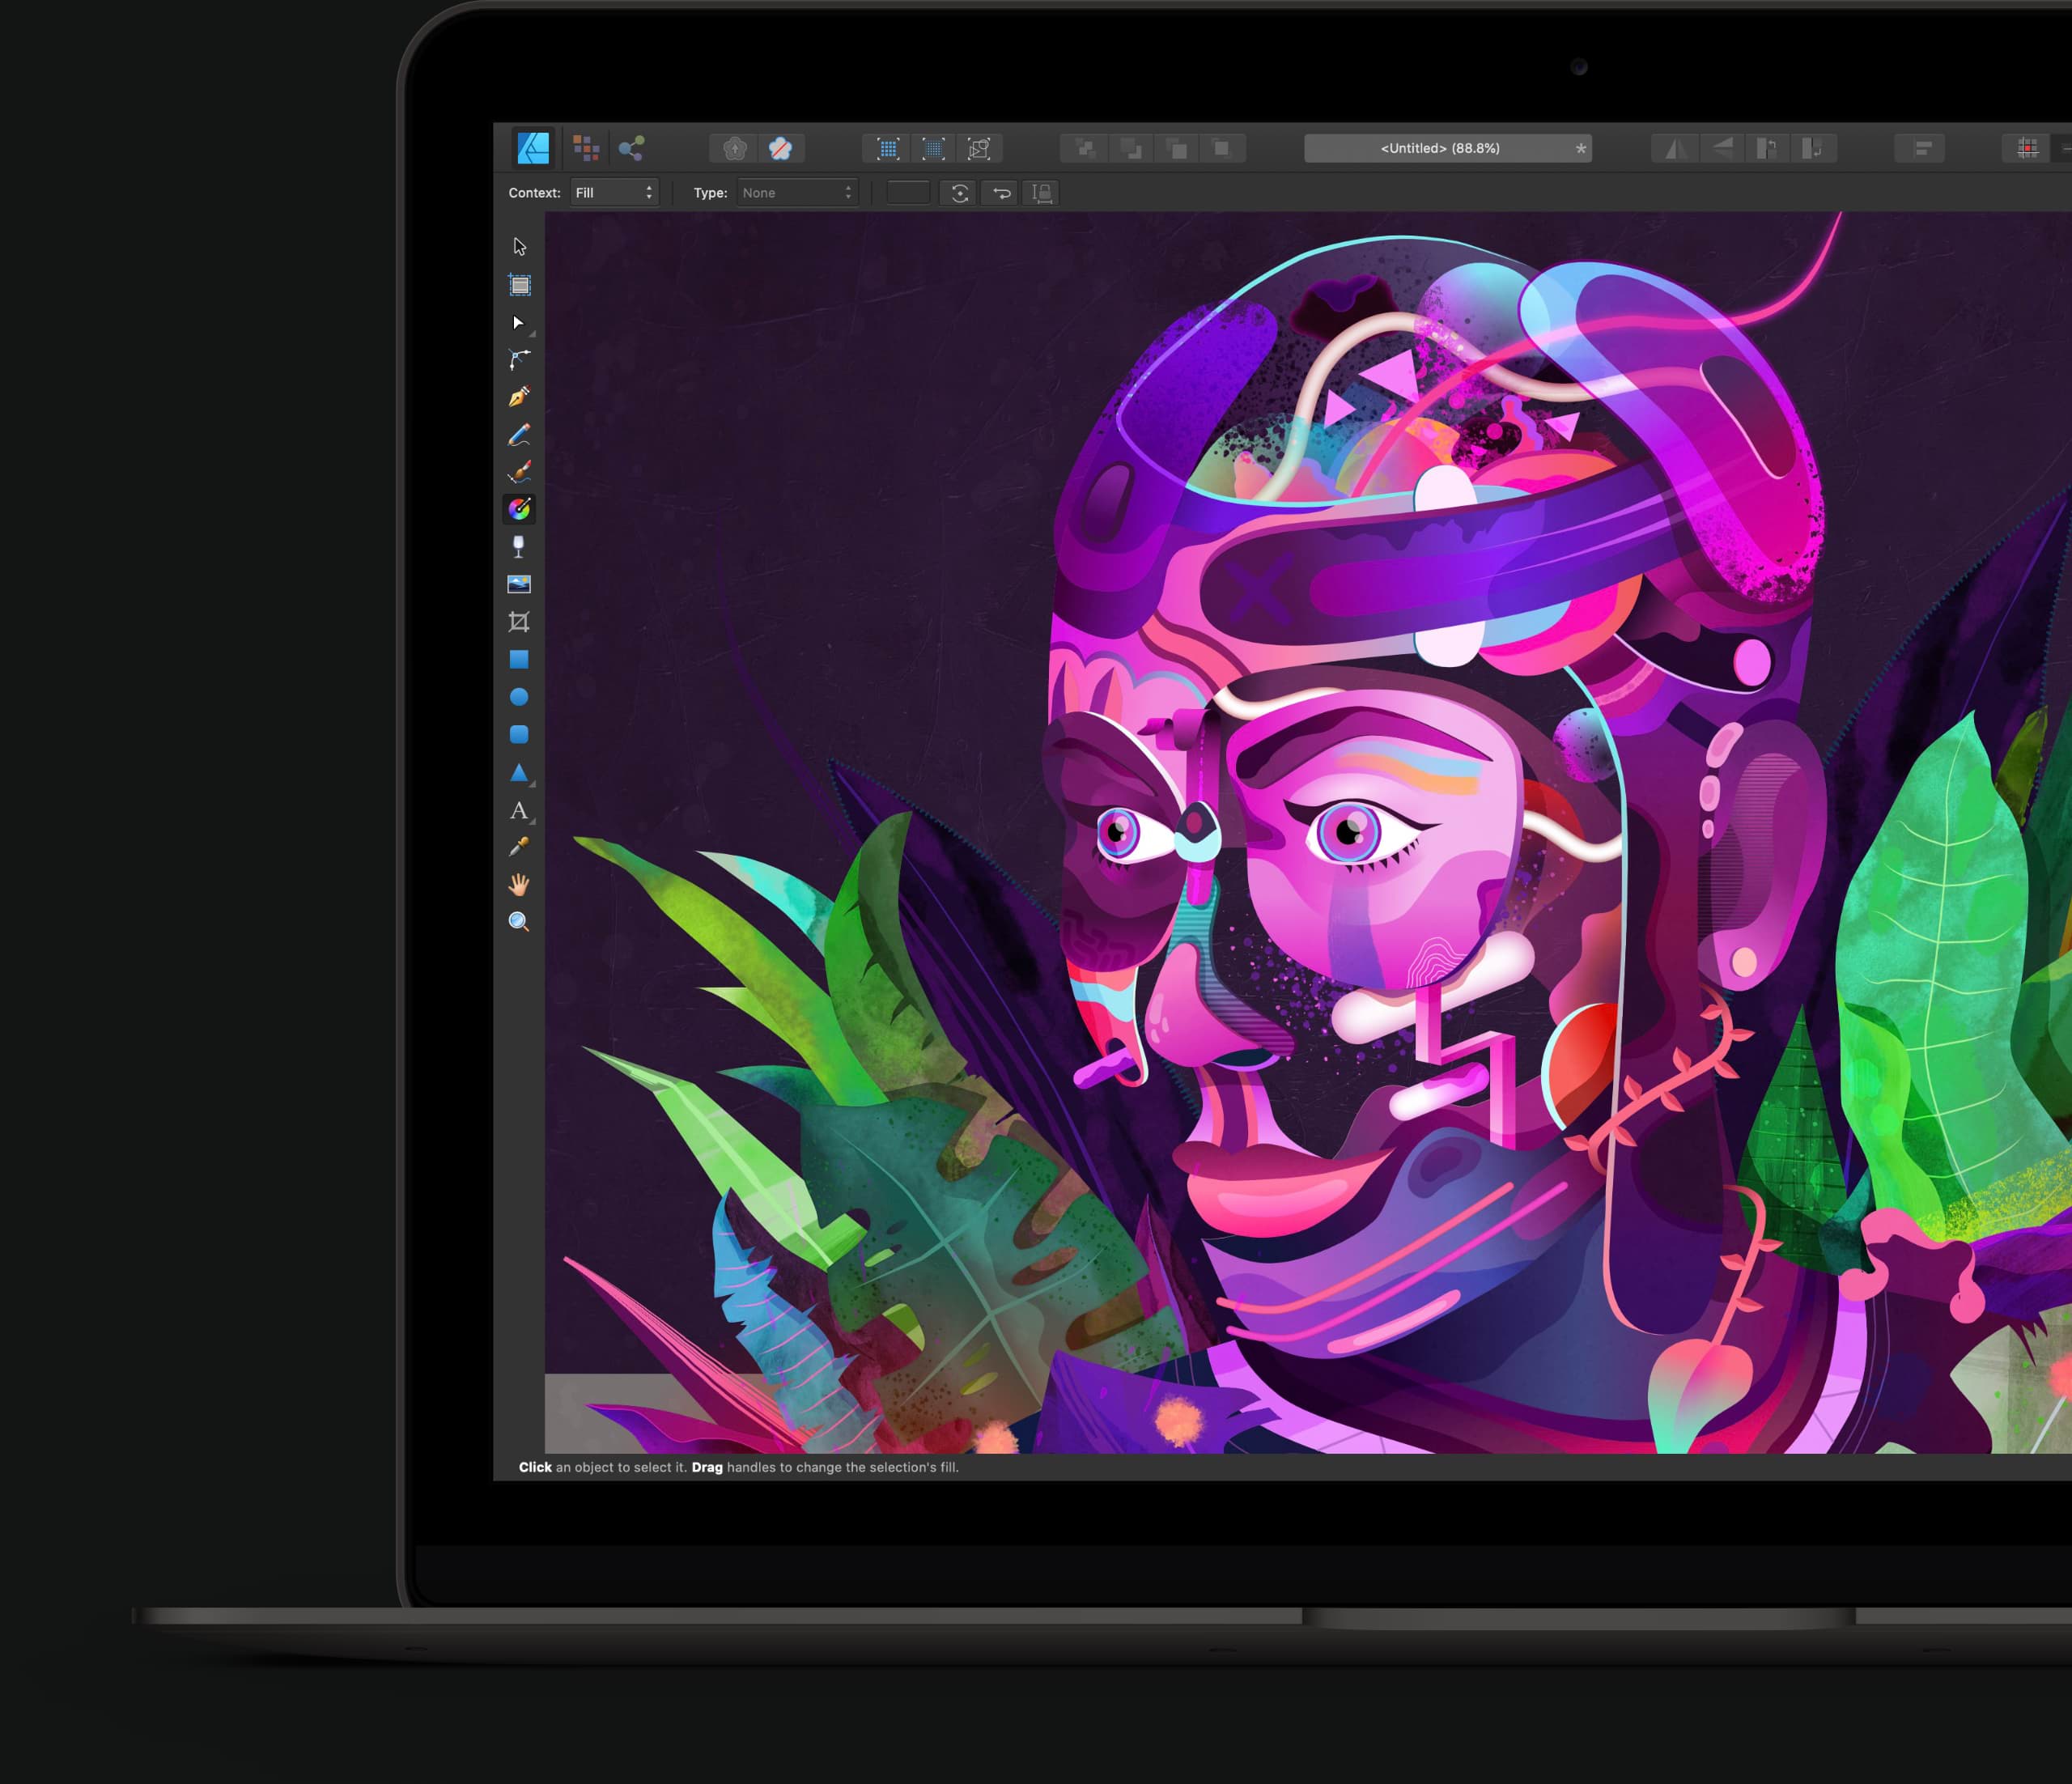 Laptop screen showing abstract illustration of transparent person made up of colorful shapes and objects in front of green leaves